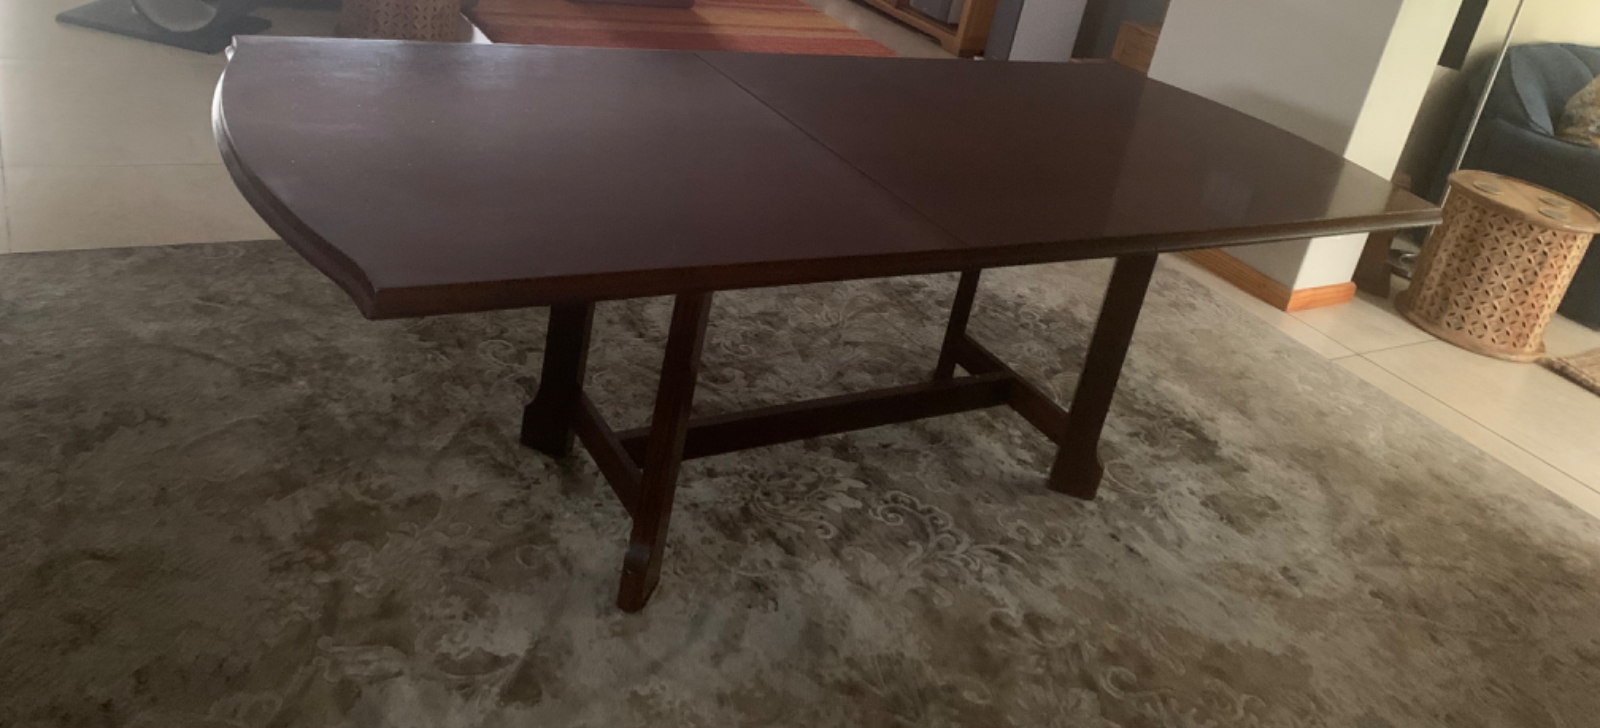 Dining Table | Brackenfell | Gumtree South Africa